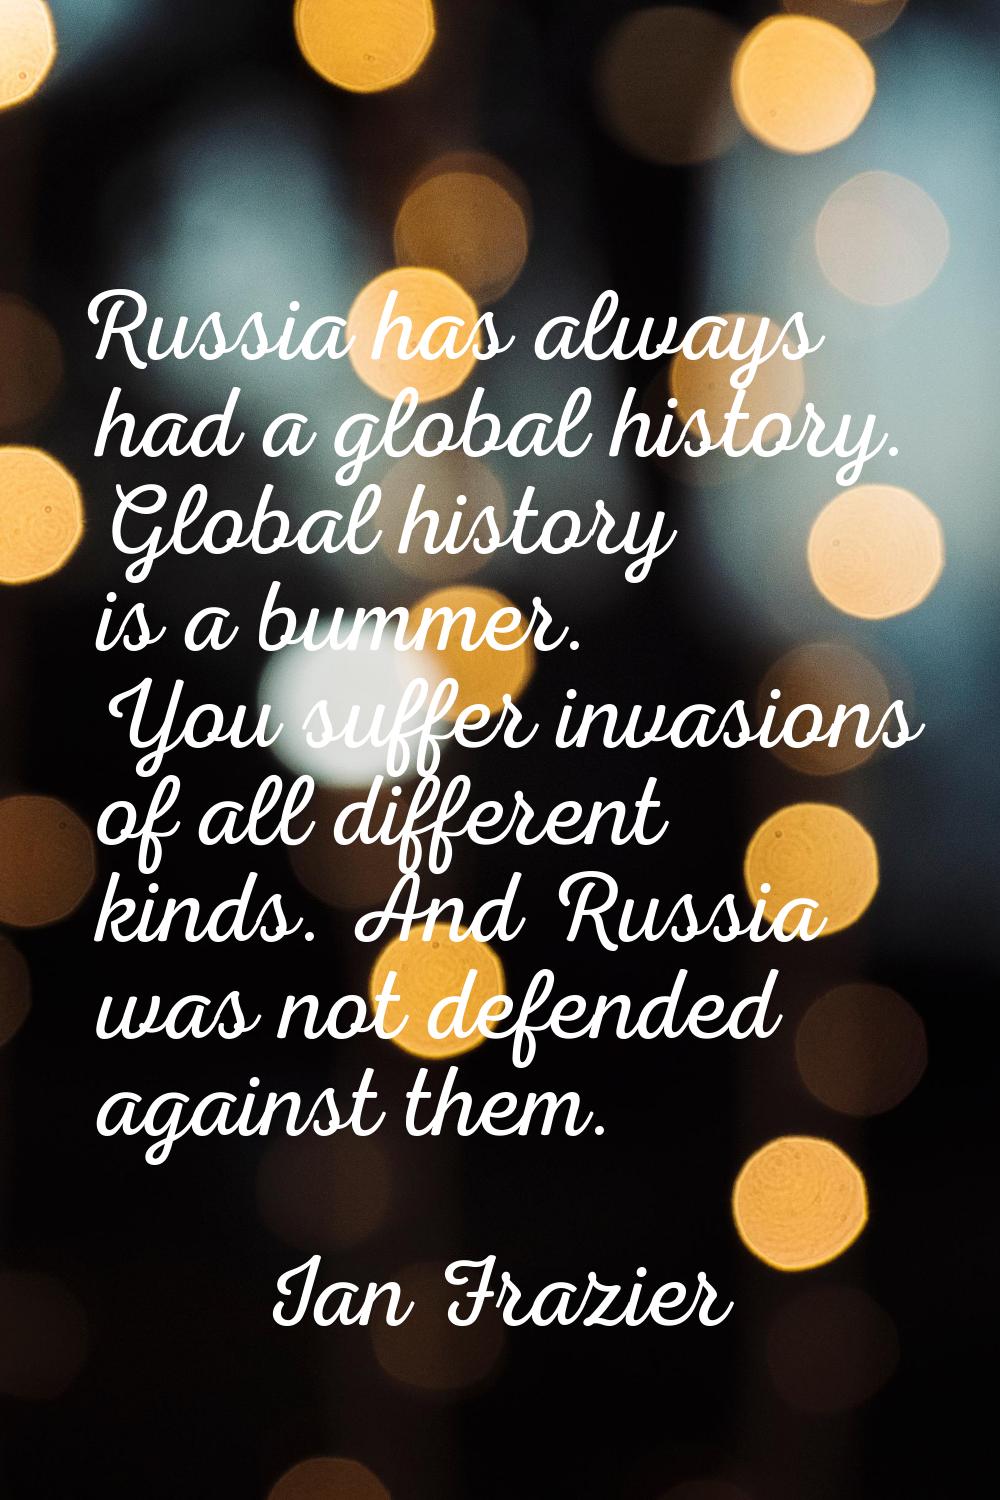 Russia has always had a global history. Global history is a bummer. You suffer invasions of all dif